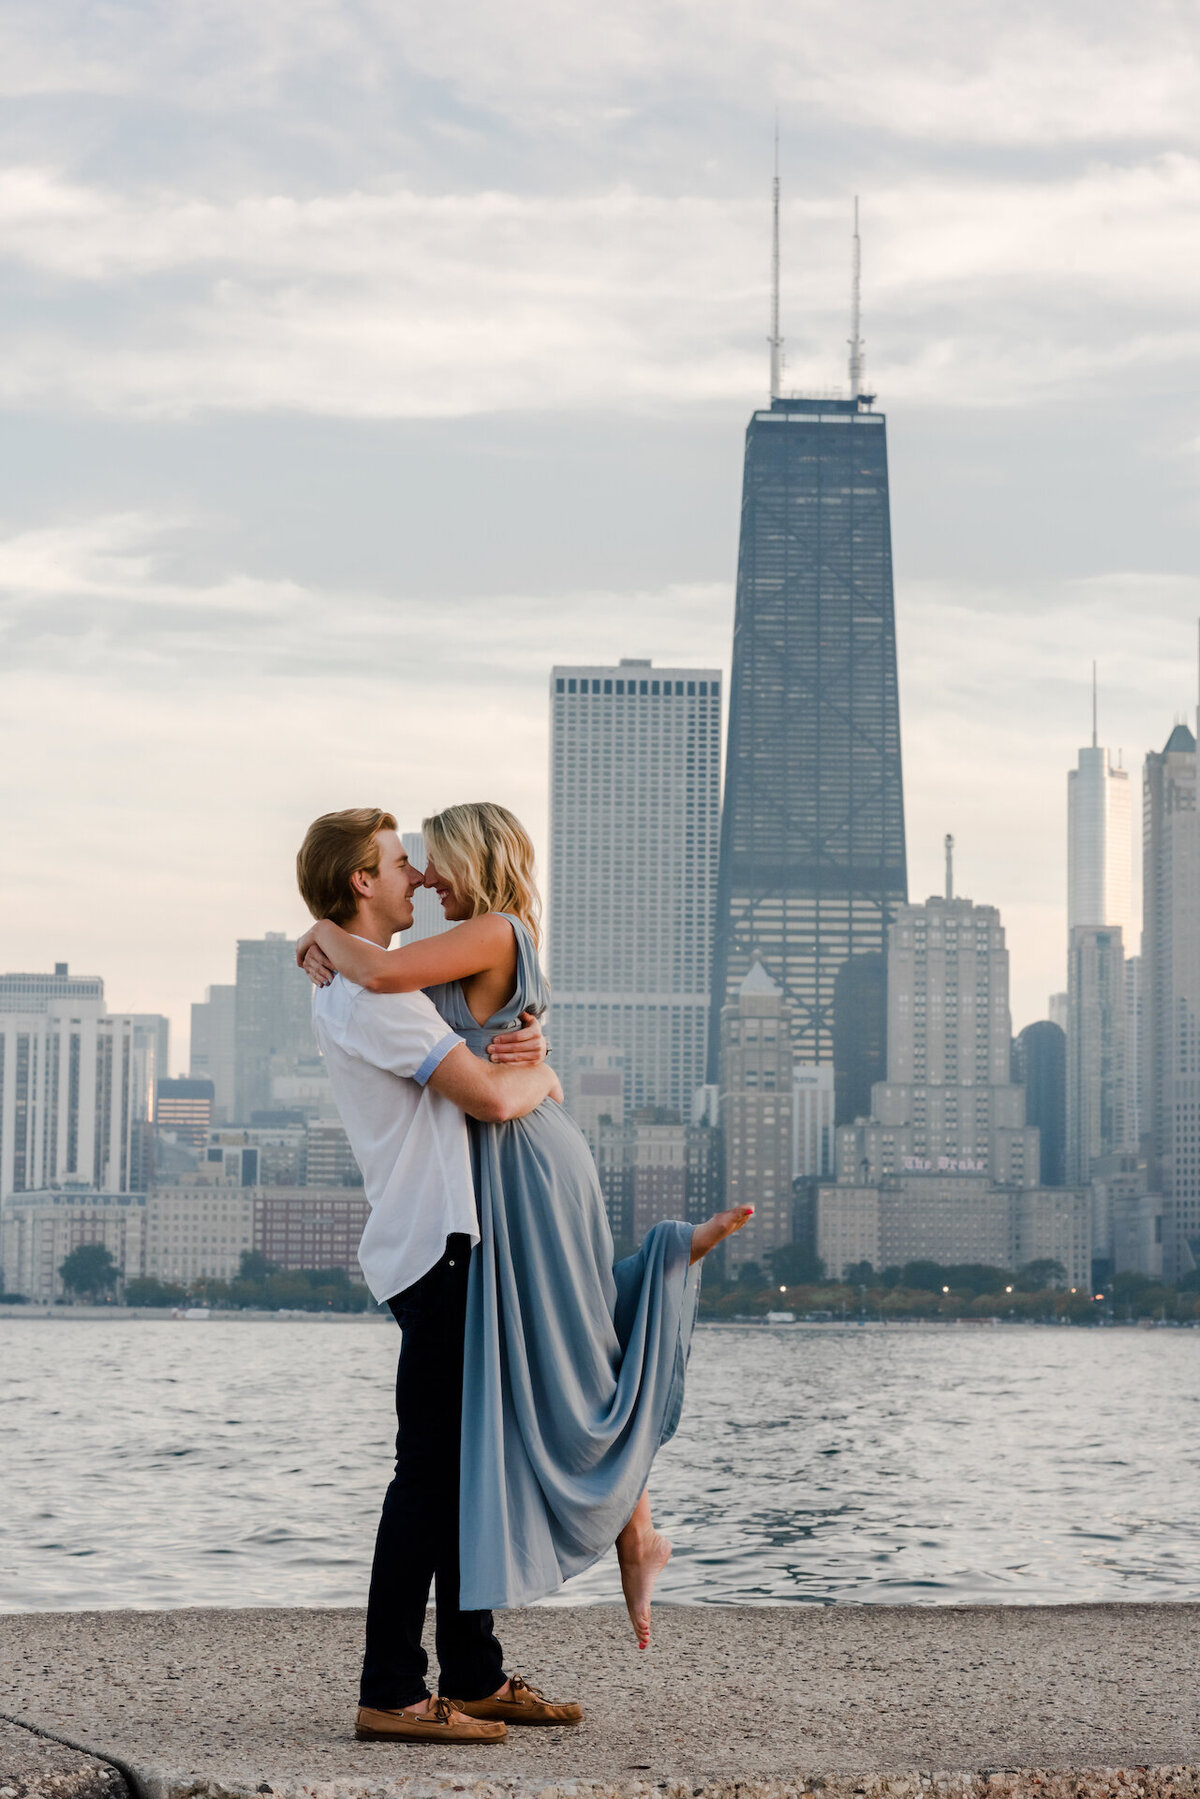 A man picka up a women in front of the Chicago skyline in Chicago